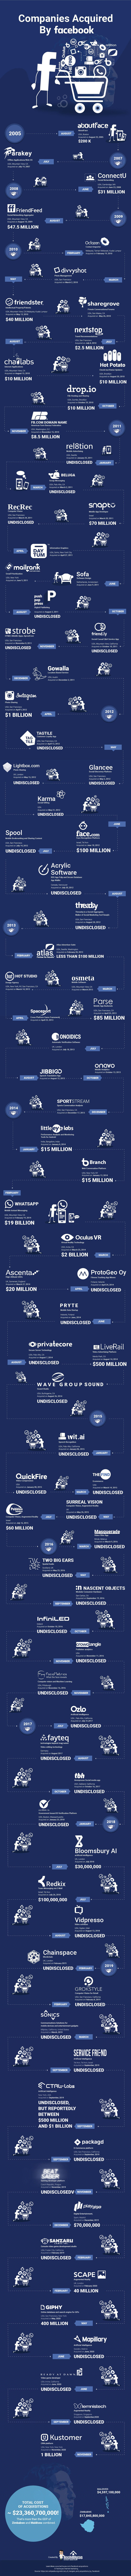 Facebook Acquisitions - The Complete List 2021